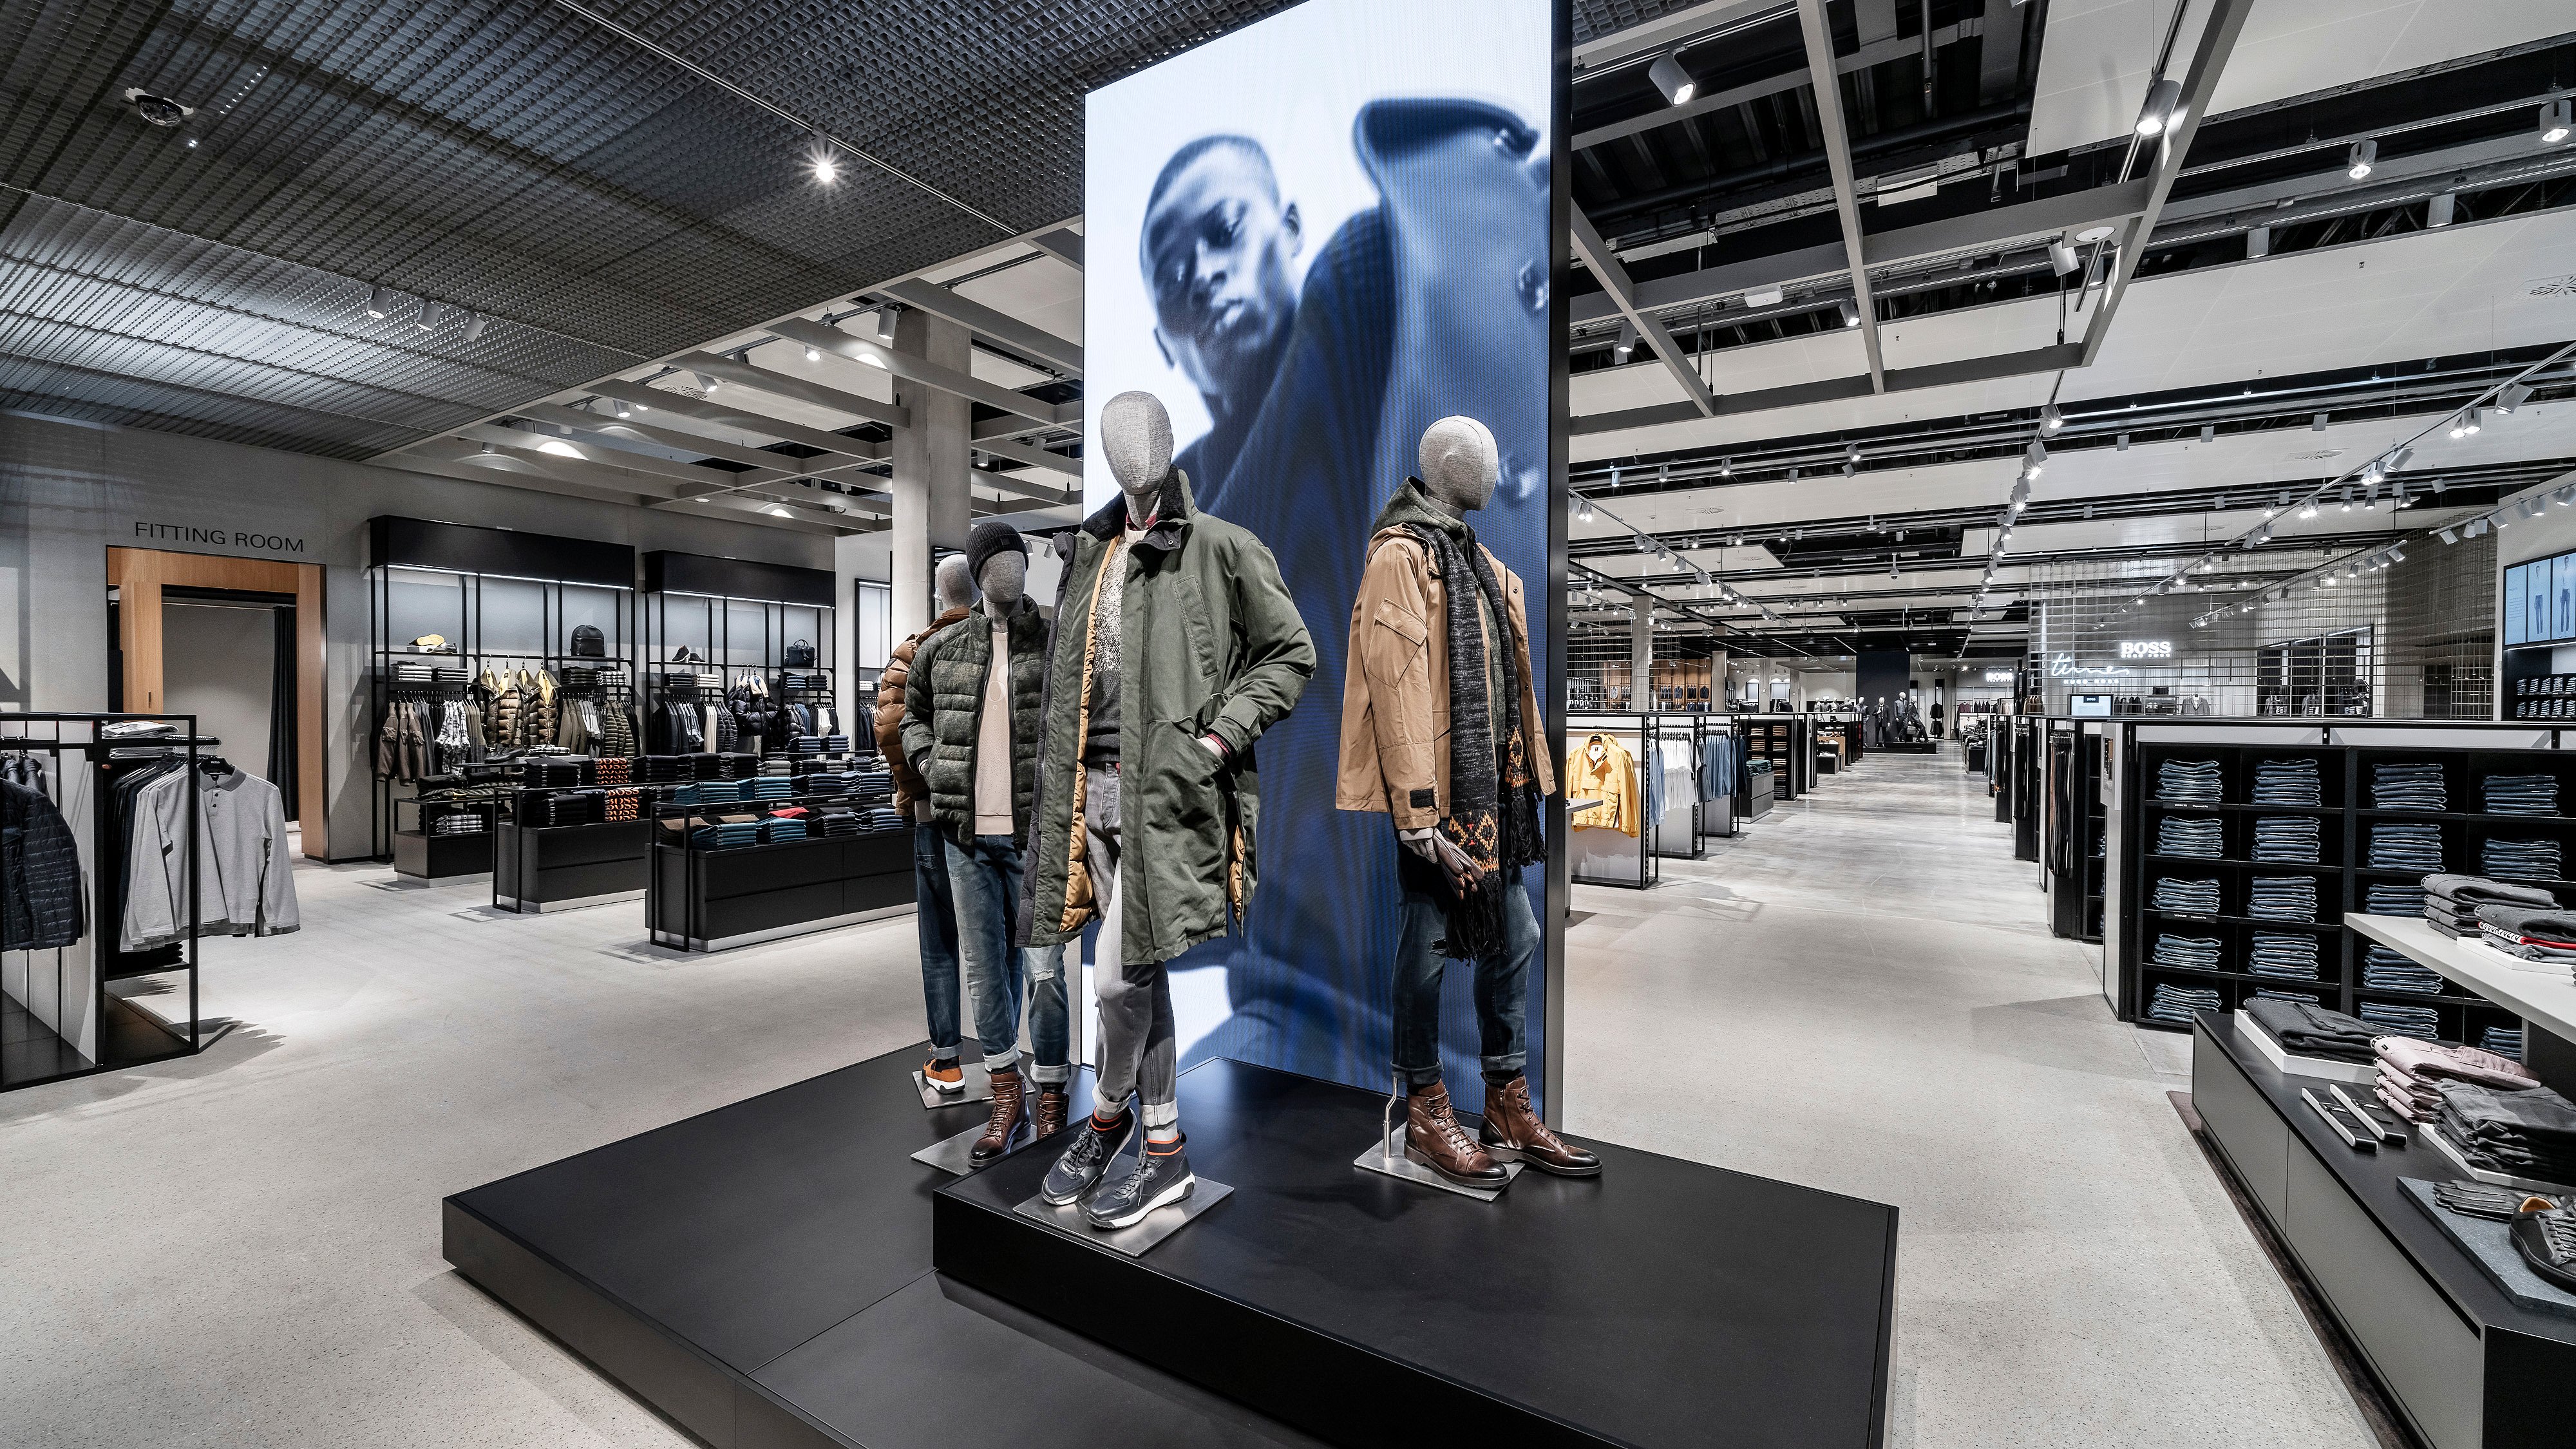 Geología Museo Guggenheim marioneta HUGO BOSS Corporate on Twitter: "Yesterday, we celebrated the opening of  our new BOSS Outlet Store in Outletcity, Metzingen with an event attended  by 500 guests. The 5,216-square-meter store emphasizes sustainable store